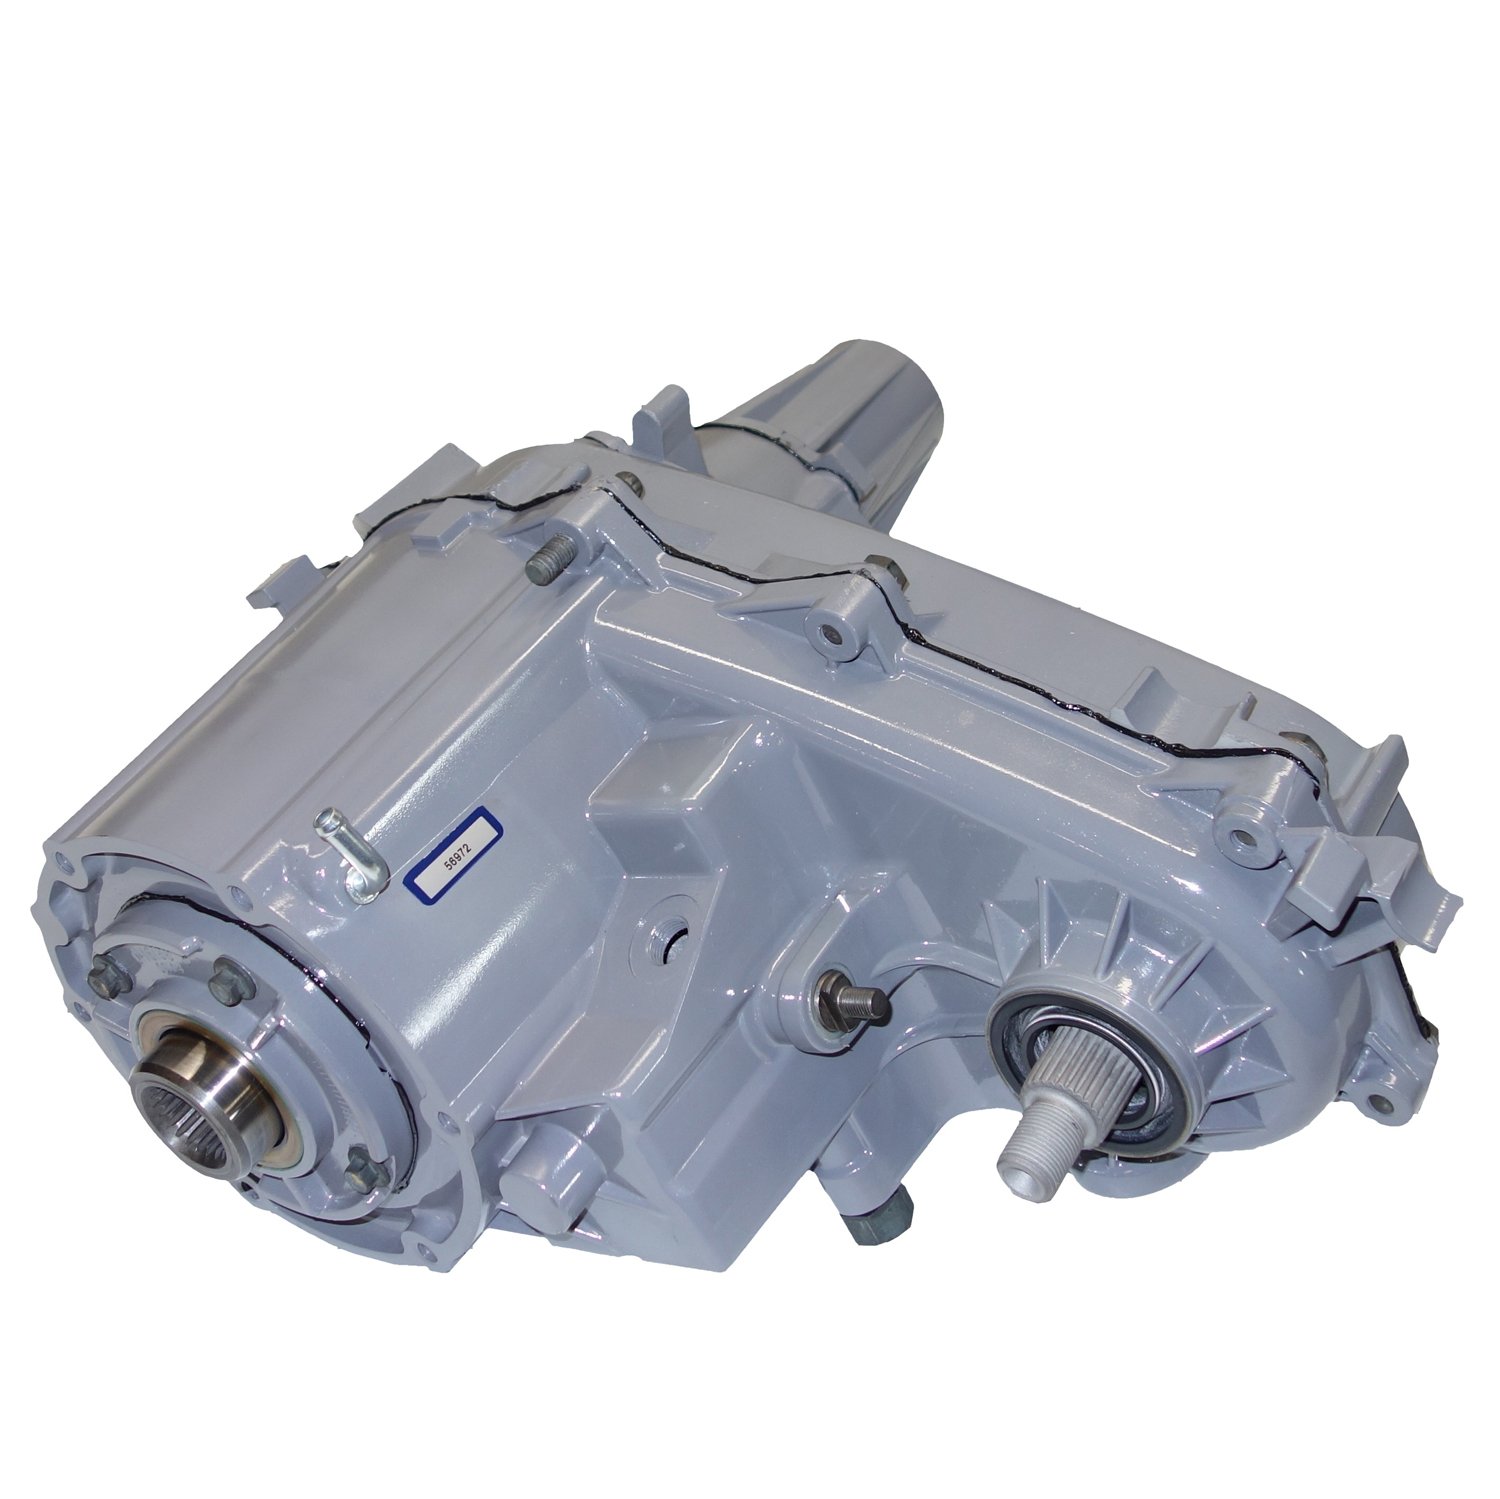 Remanufactured NP231 Transfer Case for Jeep 89-95 Wrangler & Cherokee